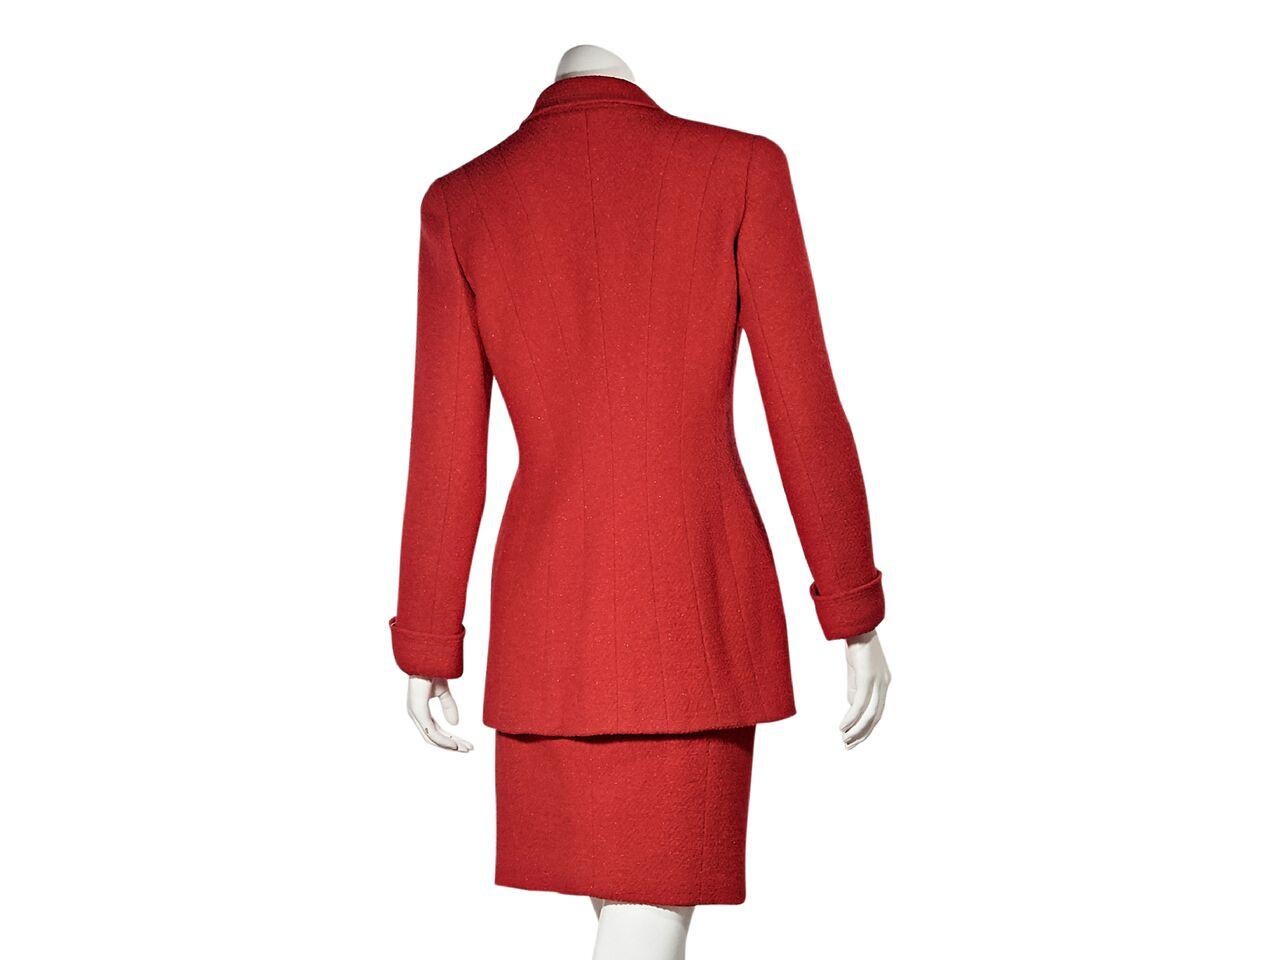 Product details:  Vintage red wool-blend skirt suit set by Chanel.  Notched lapel.  Long sleeves.  Double-breasted button front.  Button patch front pockets.  Back seams create a flattering silhouette.  Matching skirt.  Banded waist.  Concealed side